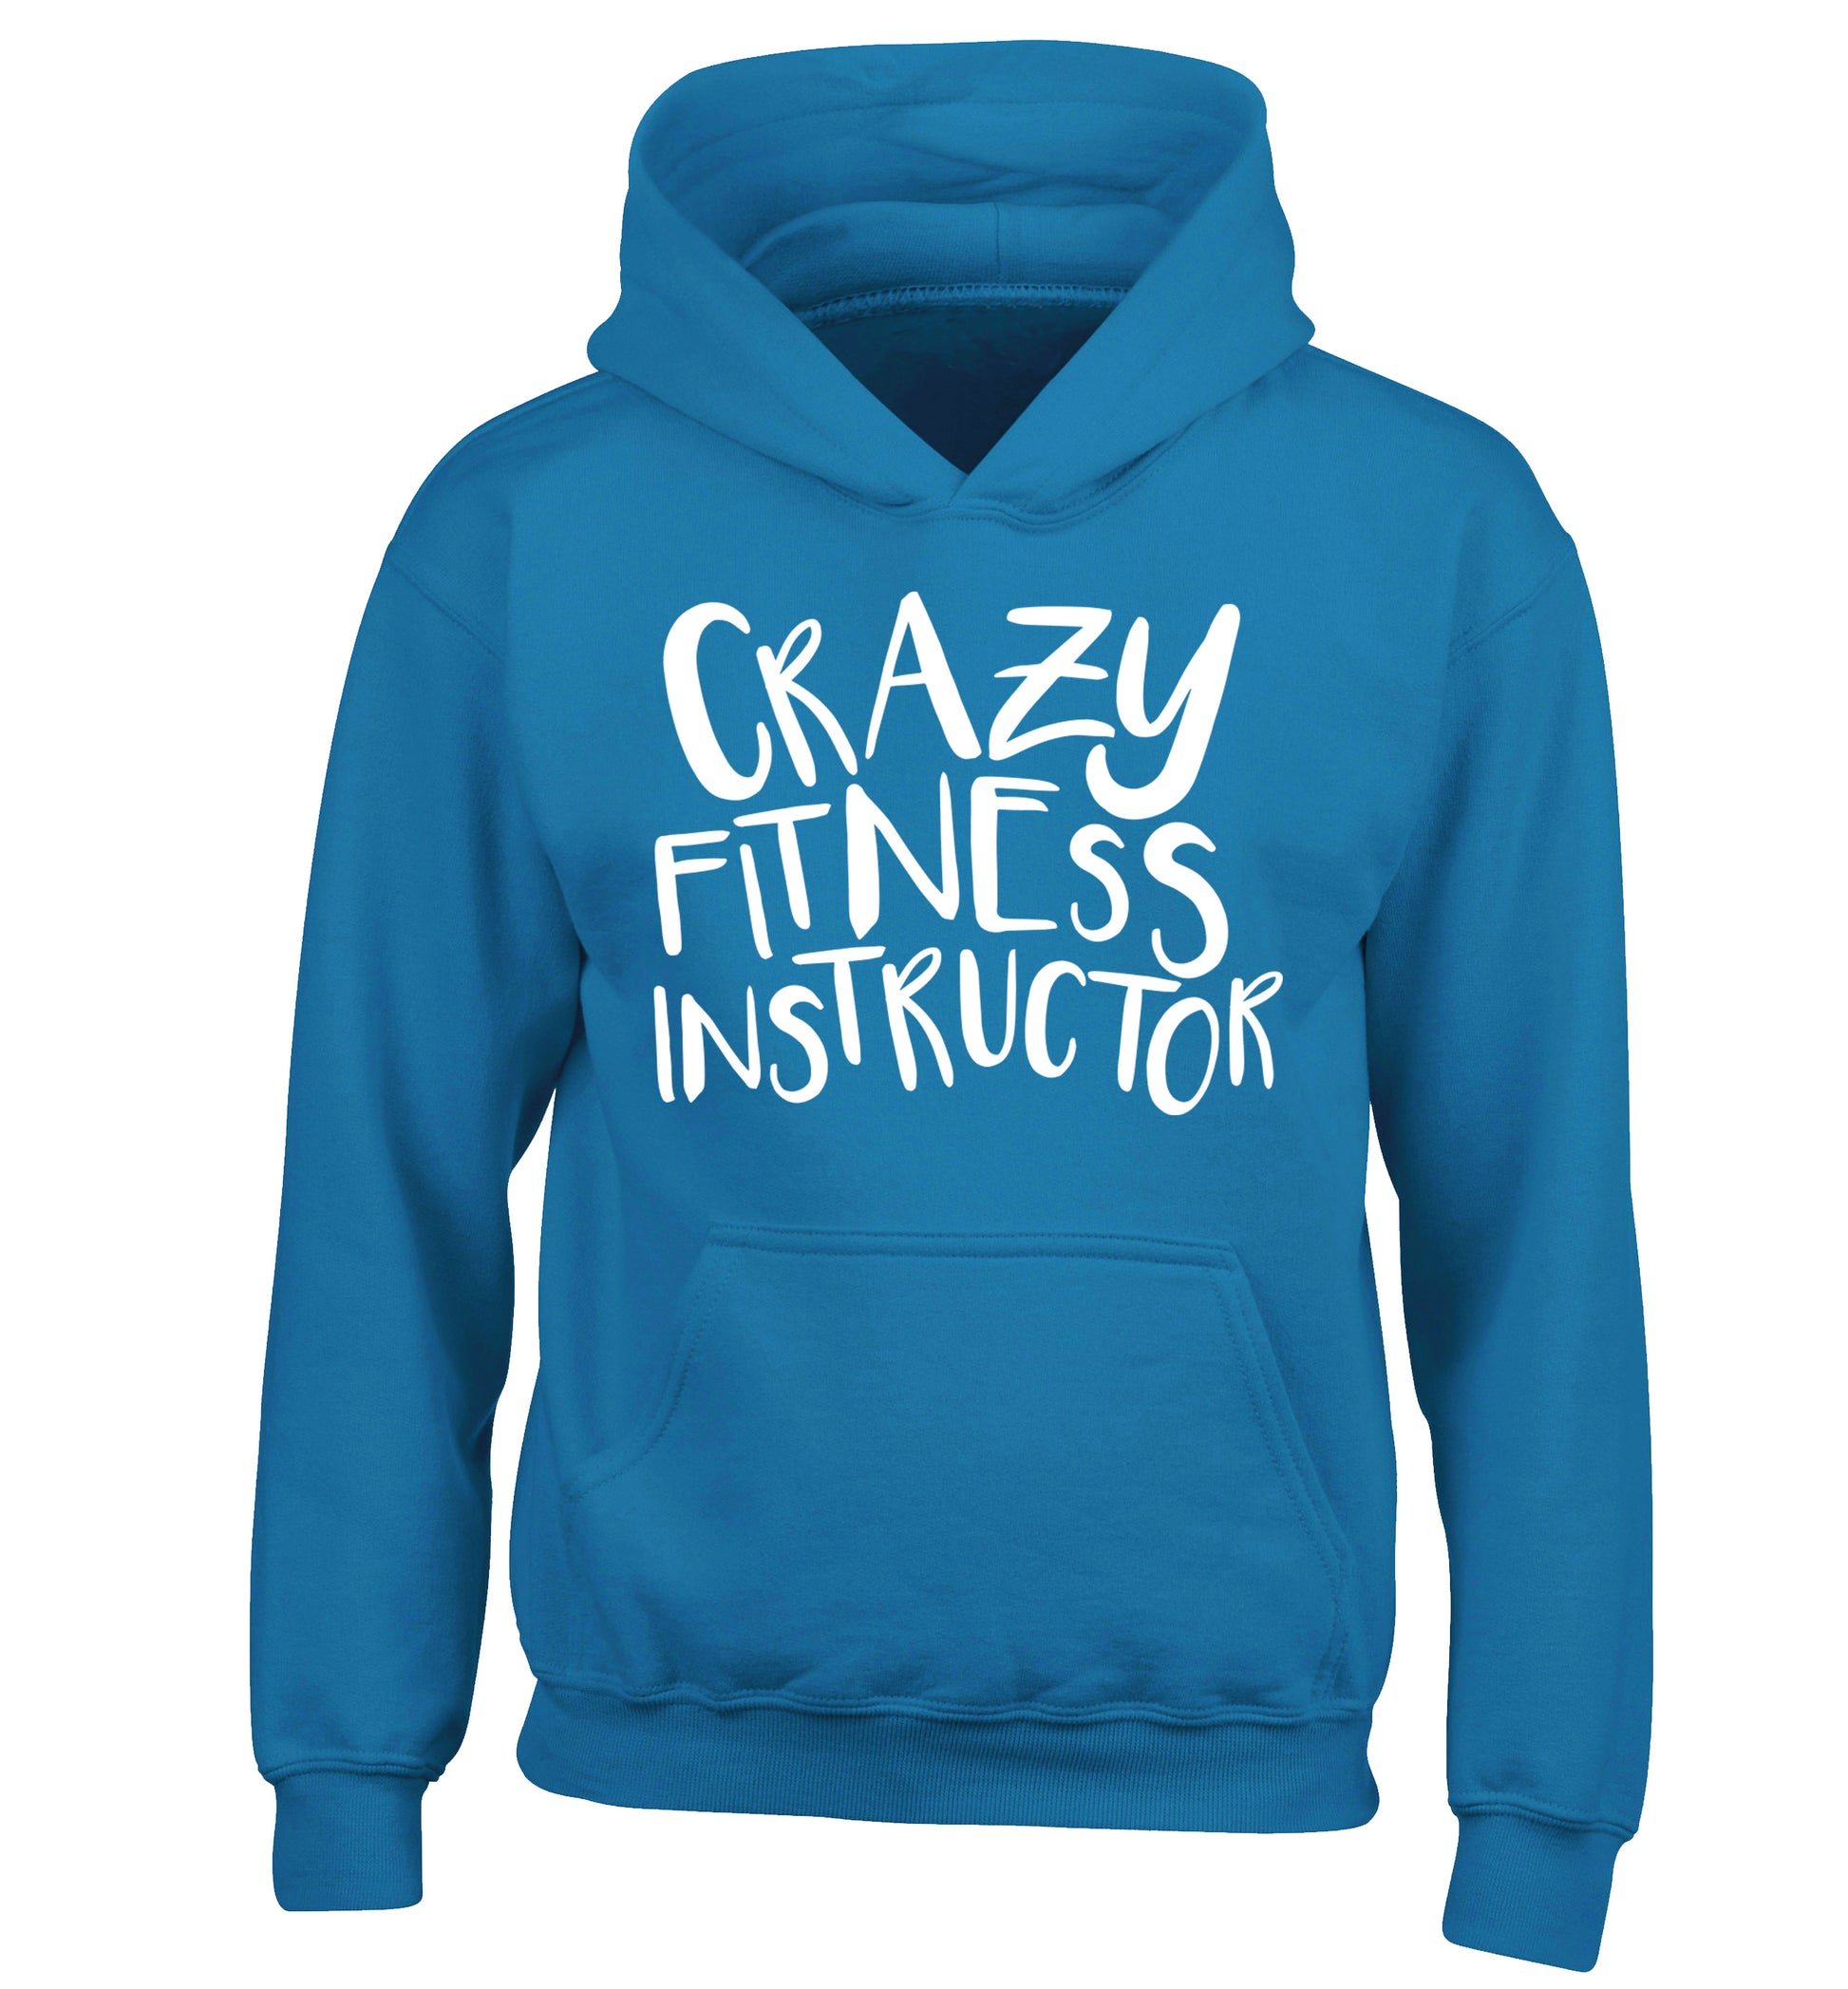 Crazy fitness instructor children's blue hoodie 12-13 Years